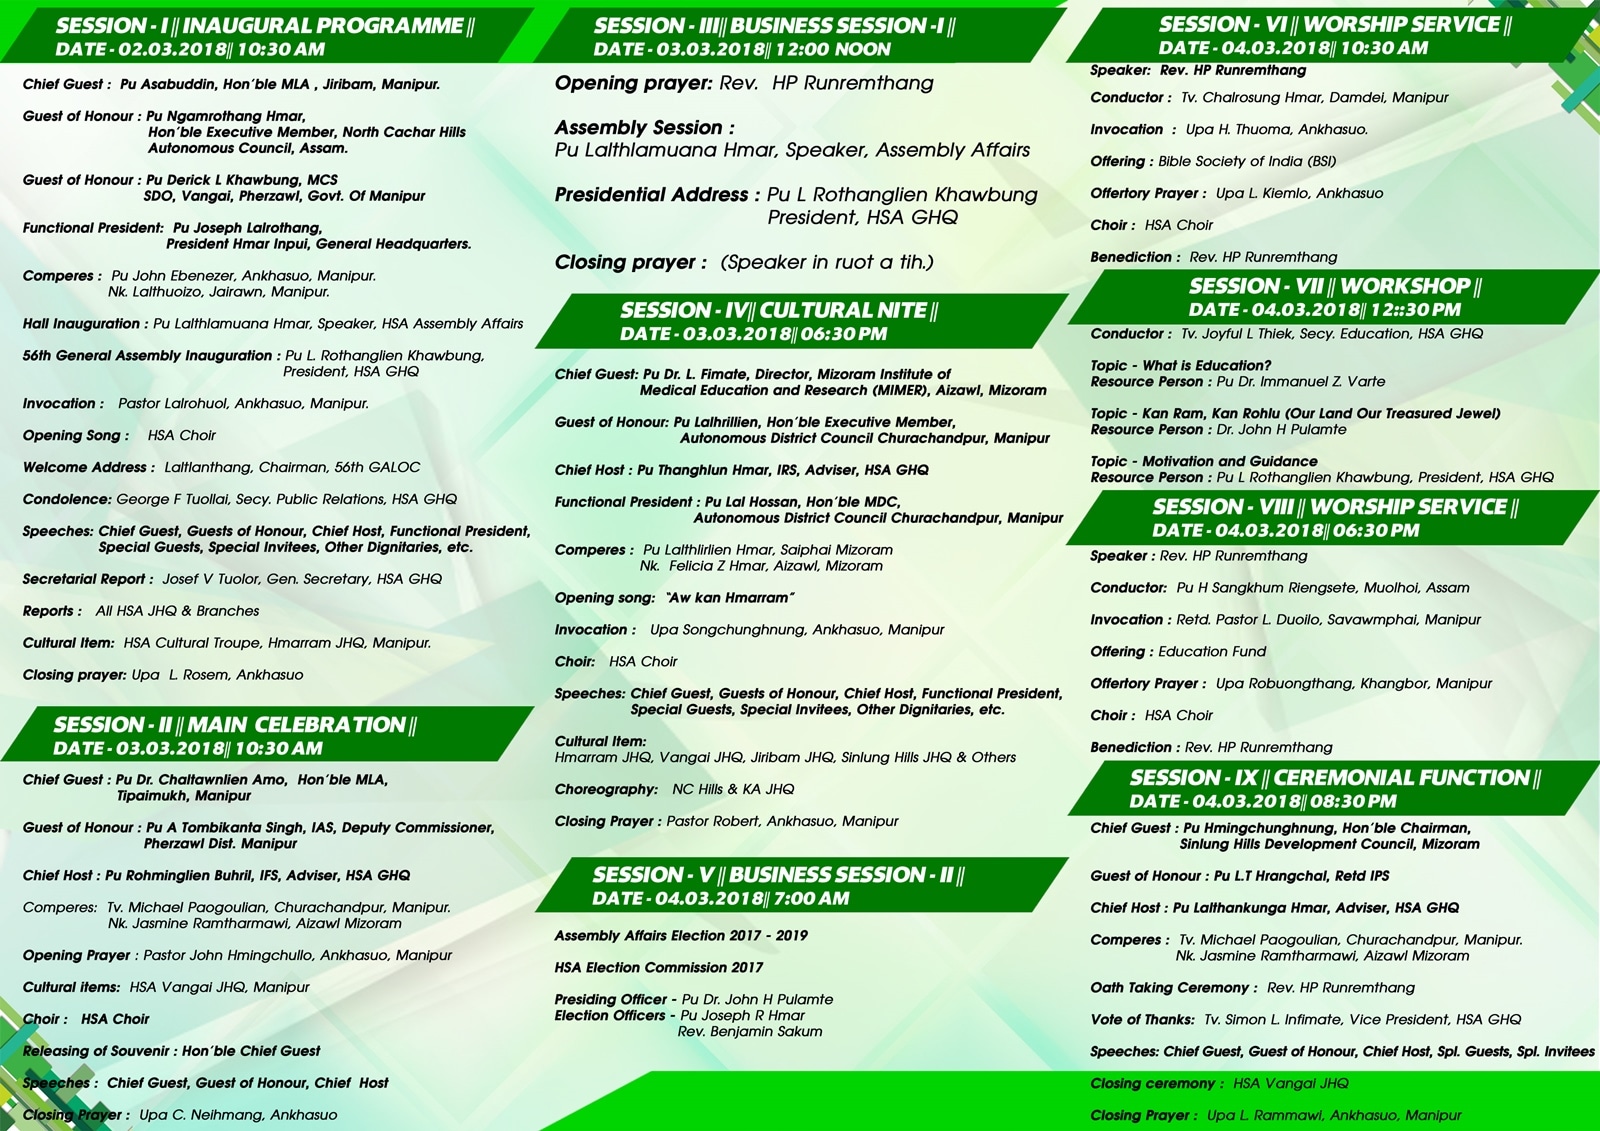 56th HSA General Assembly Programme 2